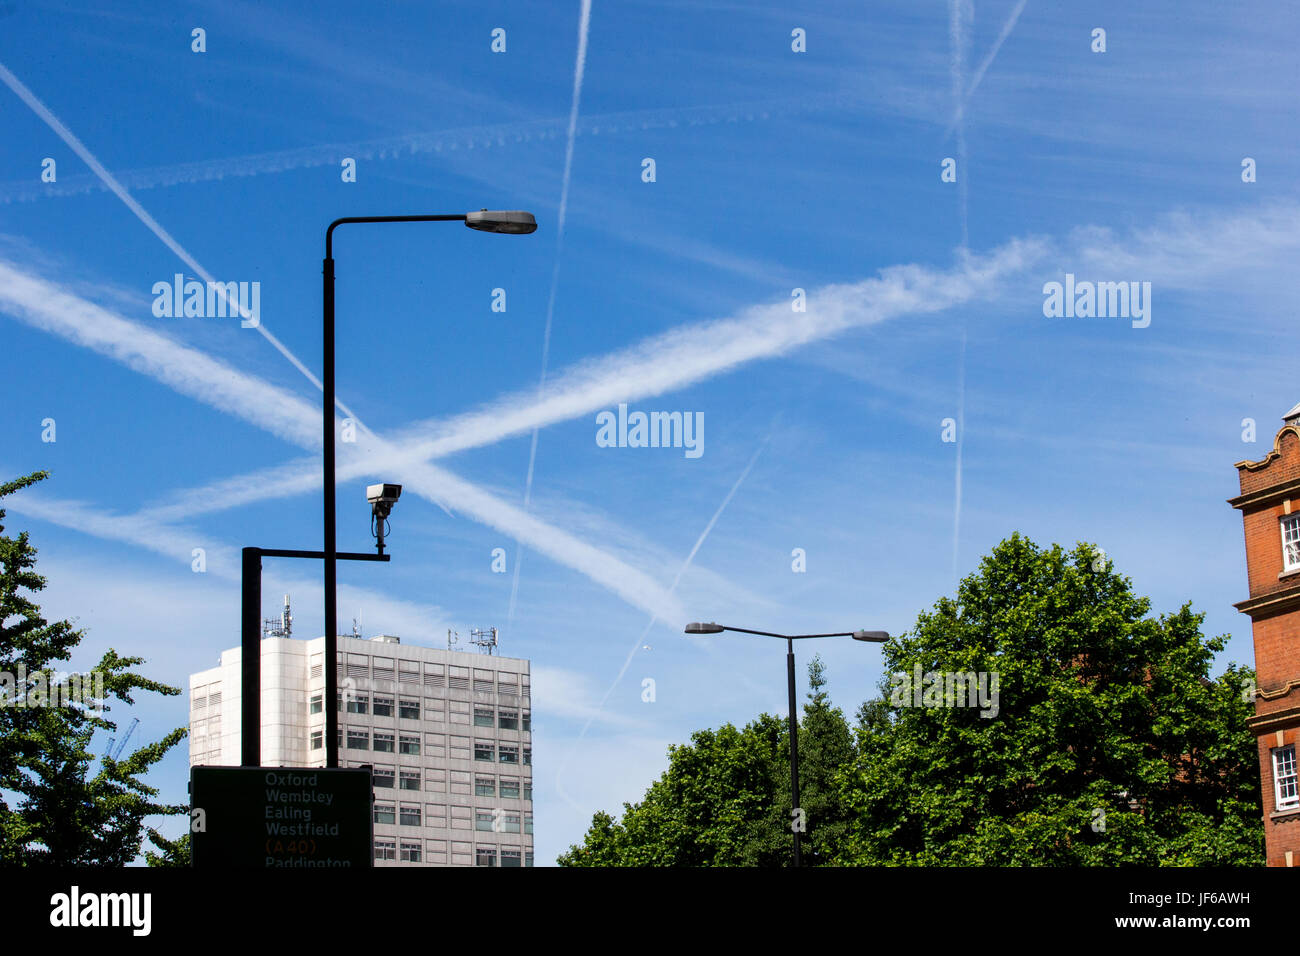 Airplane contrails over the sky in London.These show the trails left by aircraft that turn into clouds and pollute the environment Stock Photo